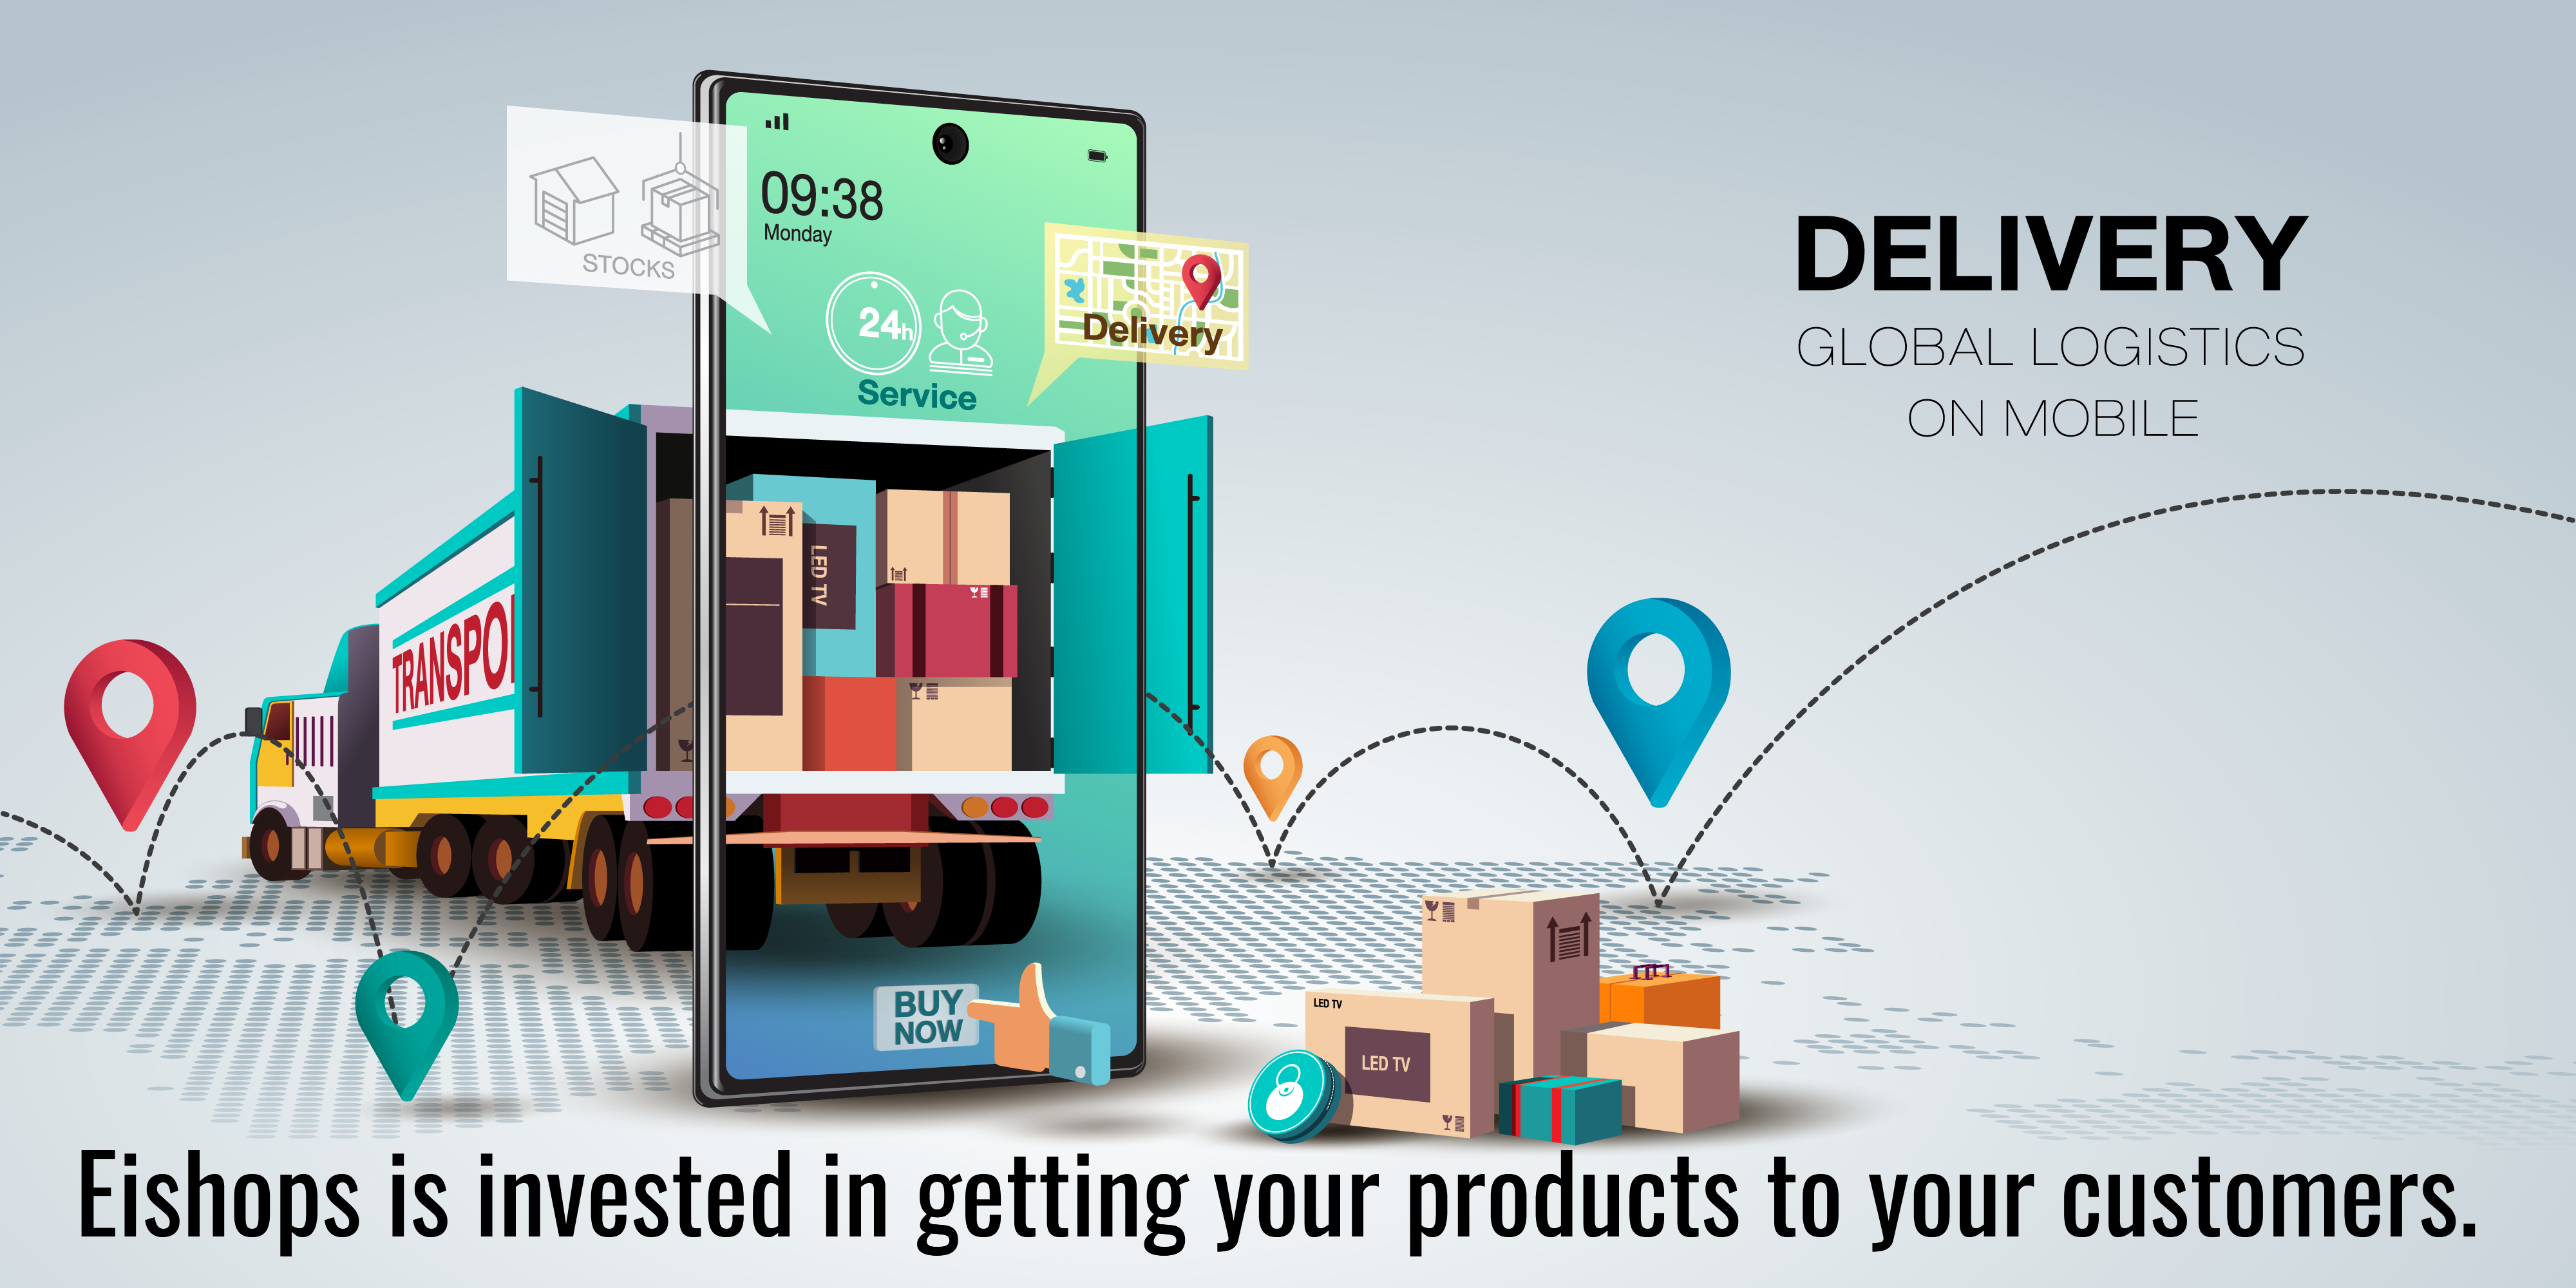 delivery global logistics on mobile - eishops is invested in getting your products to your customers